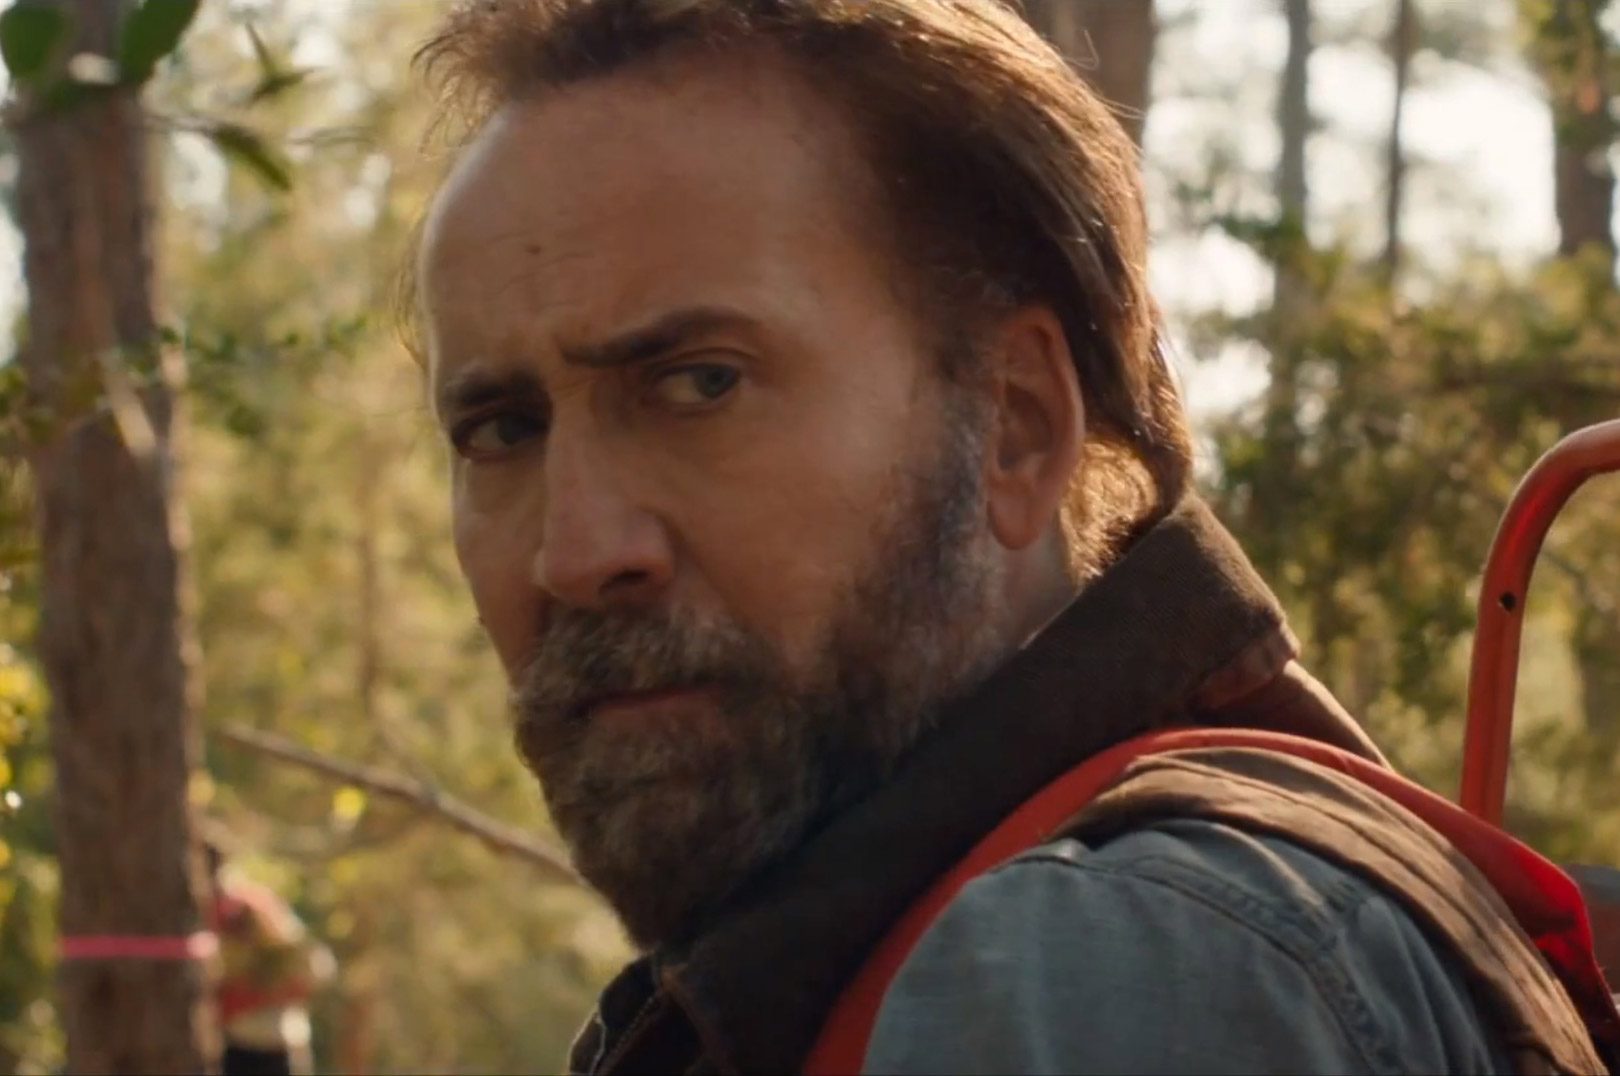 Not Even Nicolas Cage Dares to See His Next Movie: “It’s Too Much of a Whacked-Out Trip”